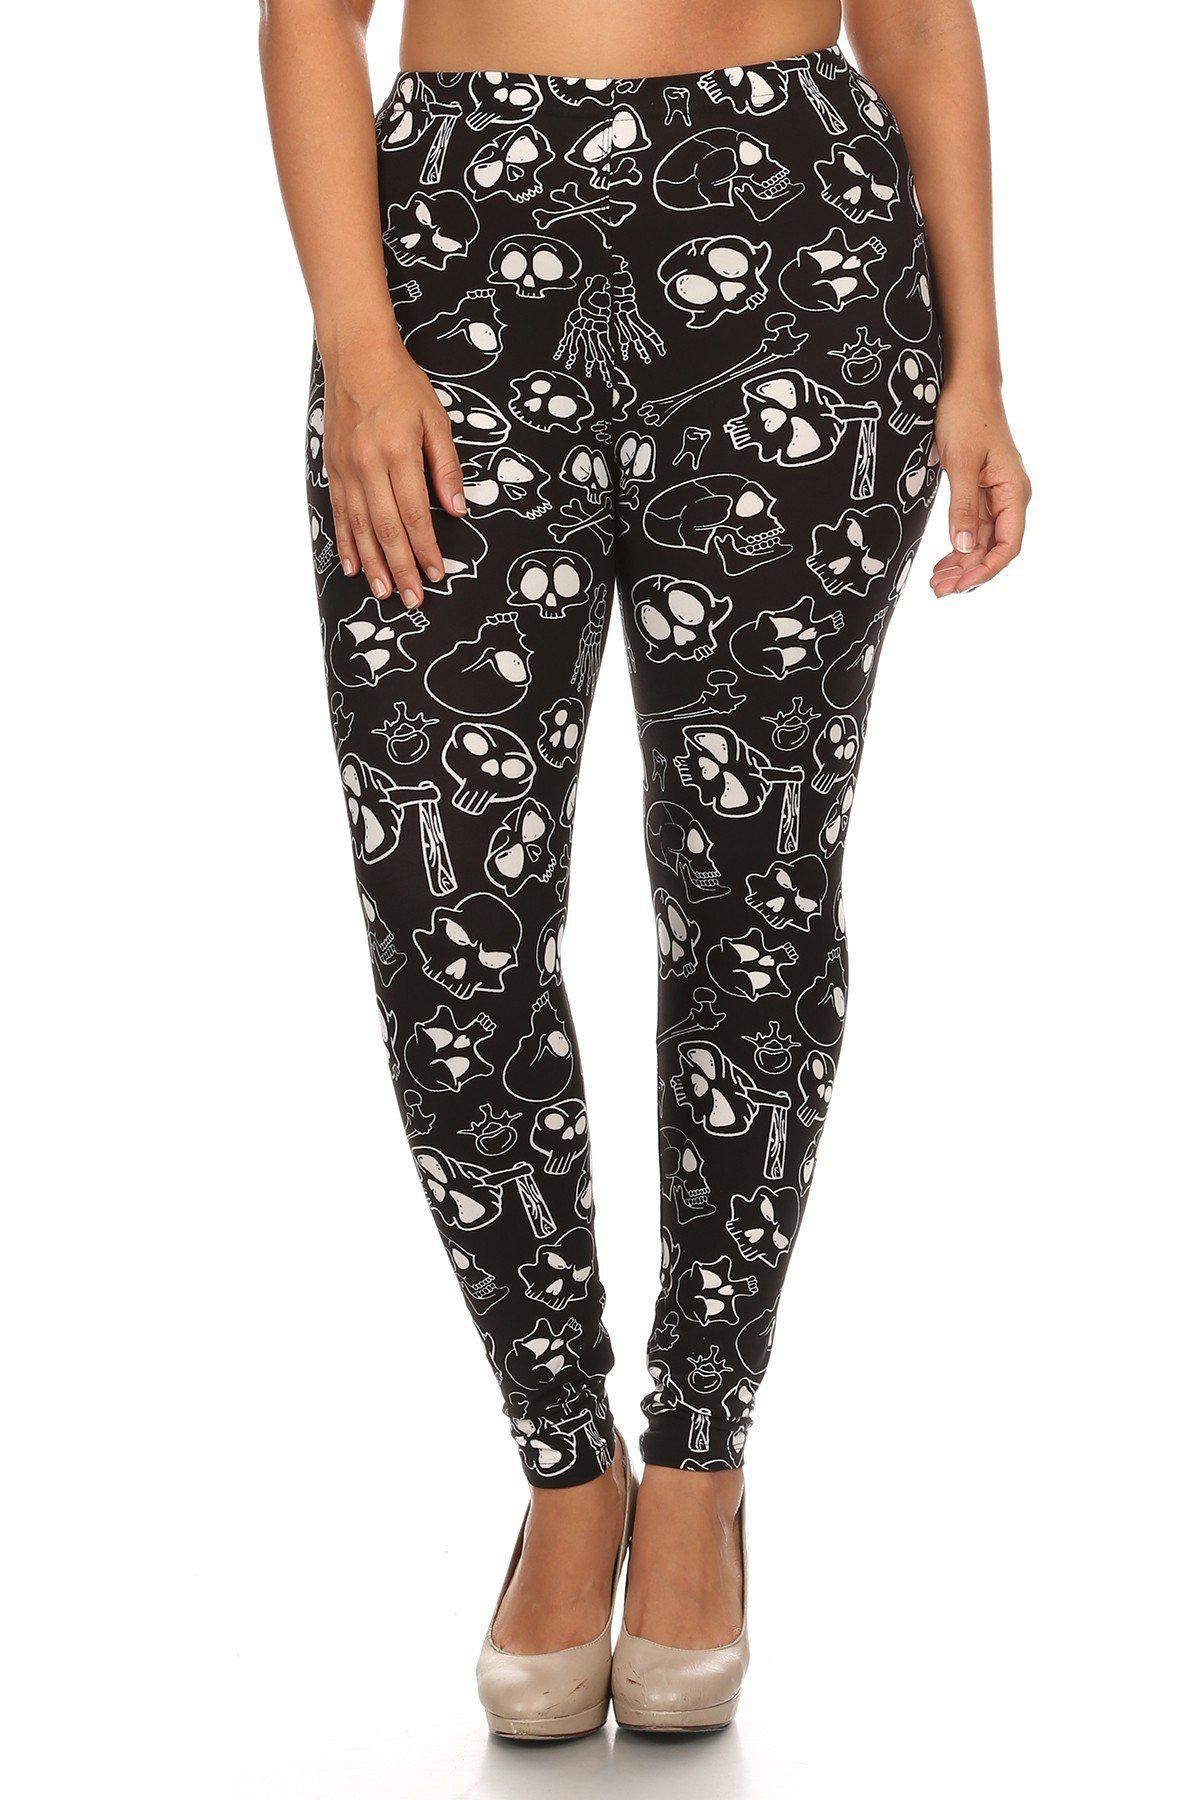 Plus Size Print, Full Length Leggings In A Fitted Style With A Banded High Waist Blue Zone Planet